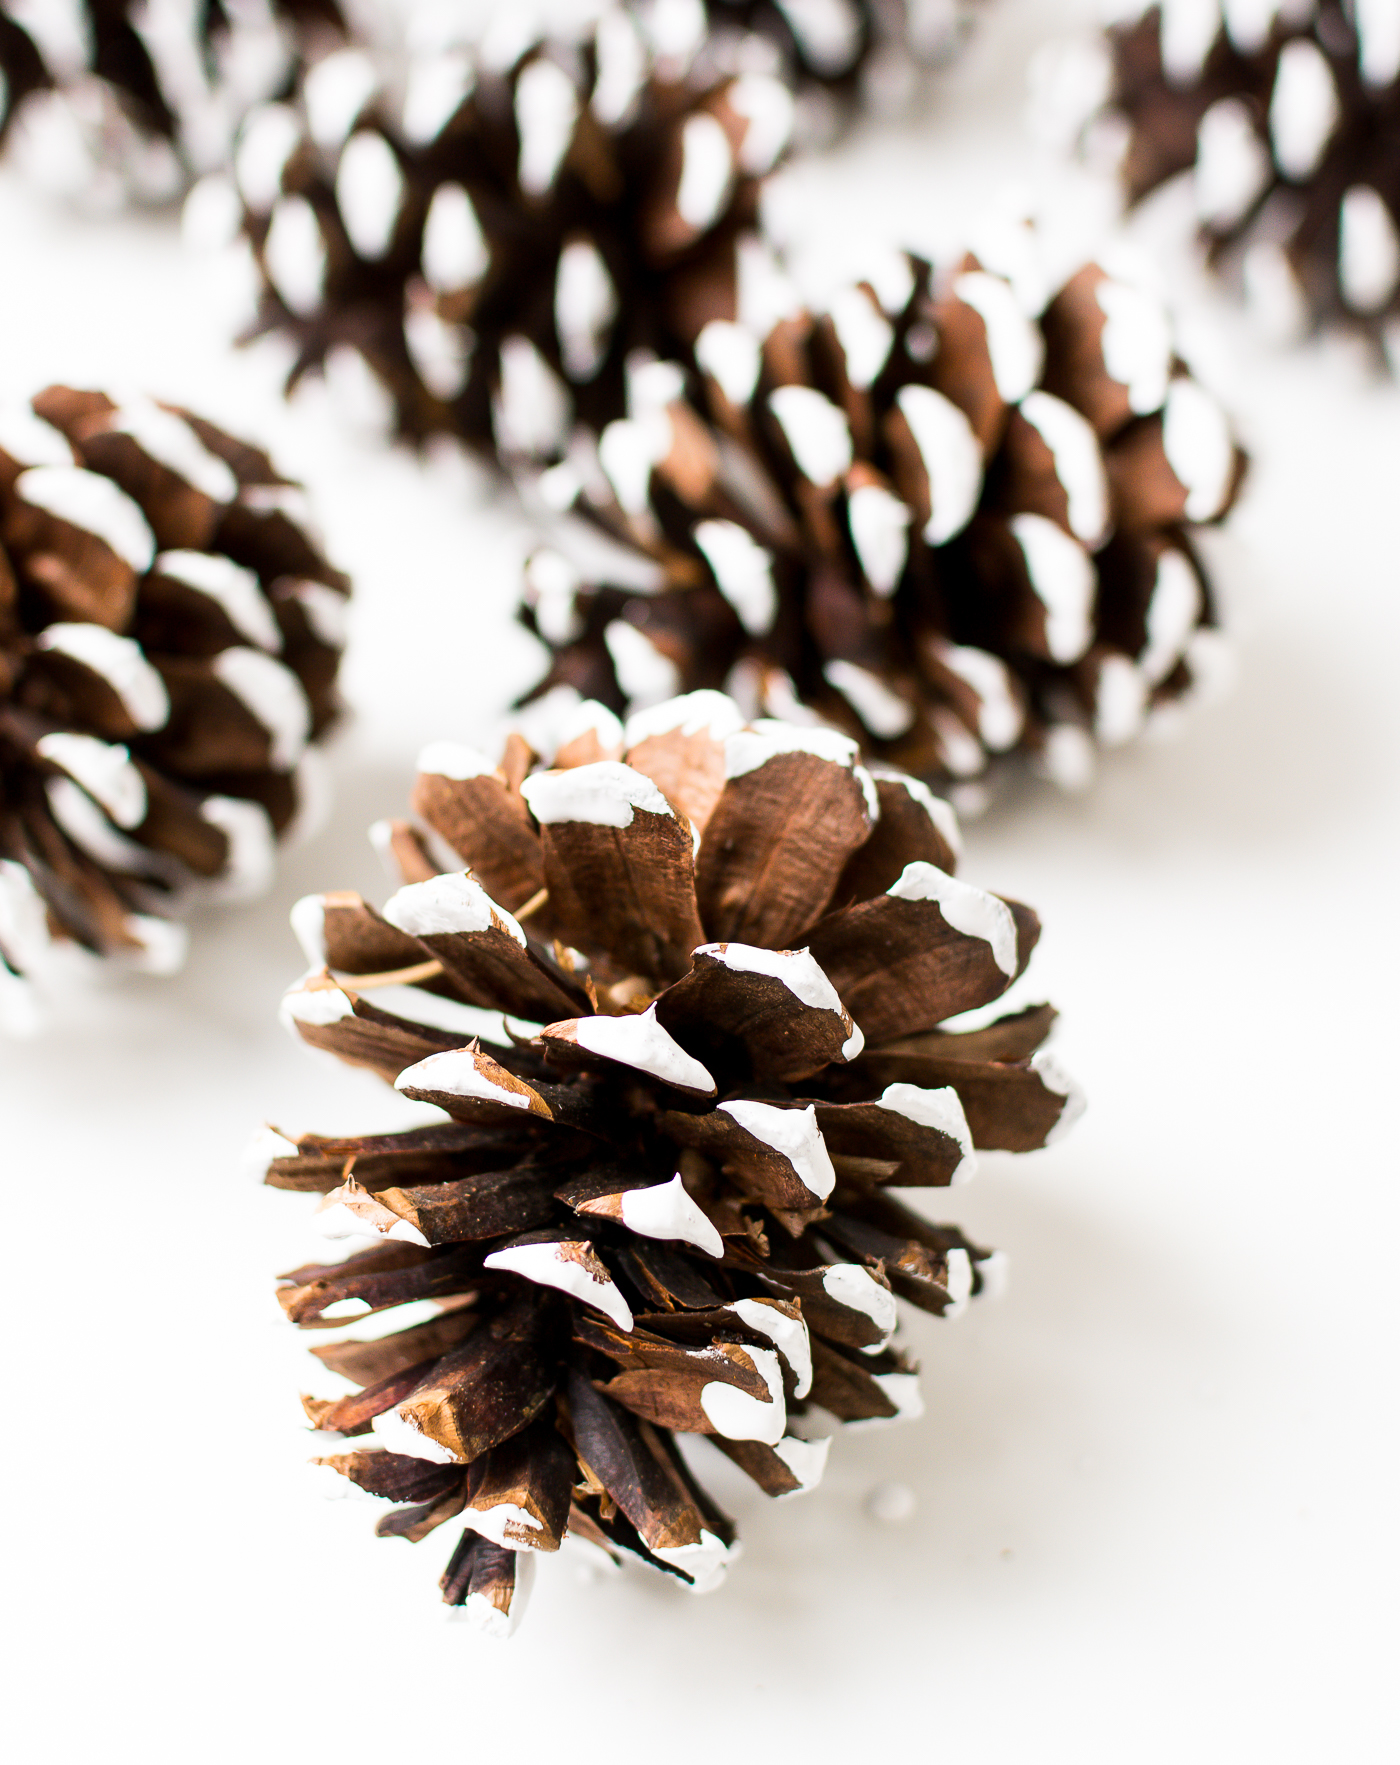 painted-pine-cones-how-to-paint-itallstartedwithpaint-com-6